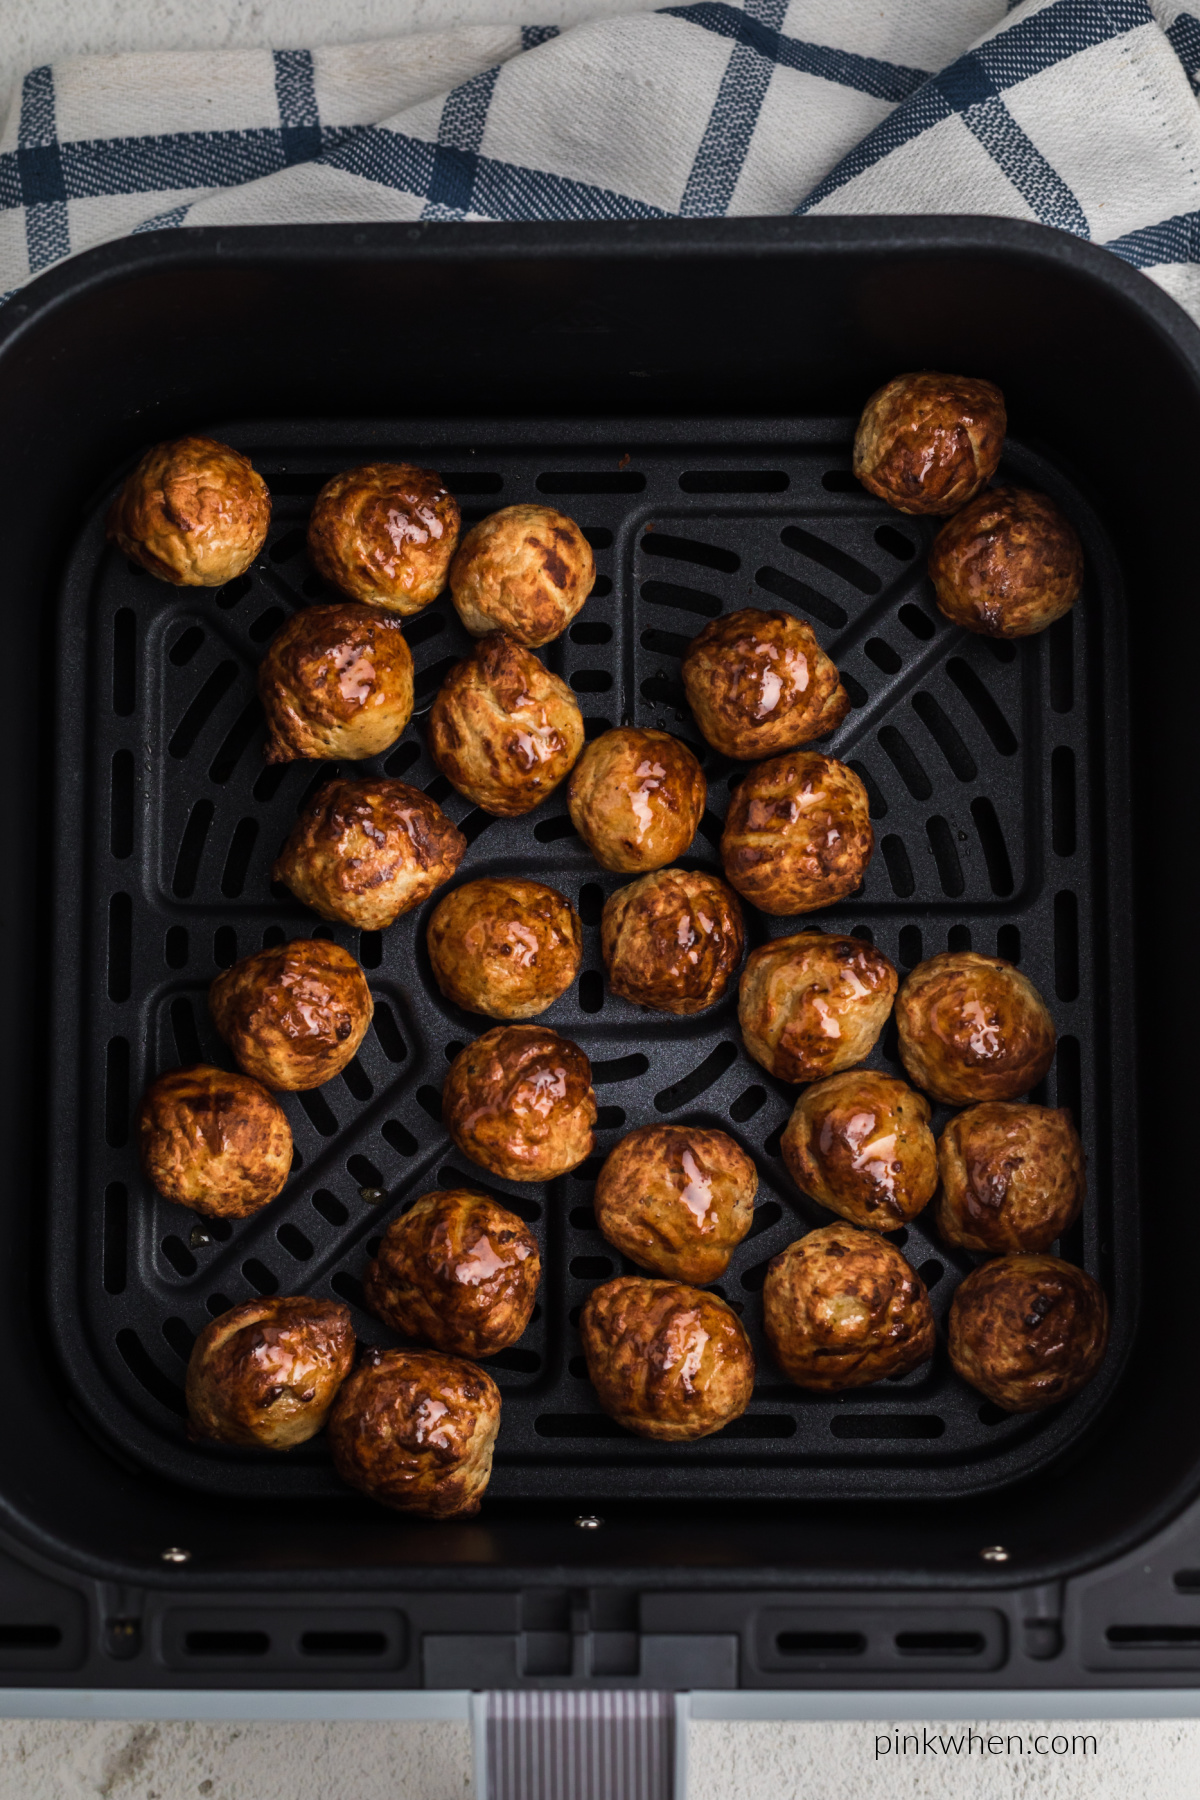 Juicy, cooked frozen meatballs in the air fryer basket, ready to serve.